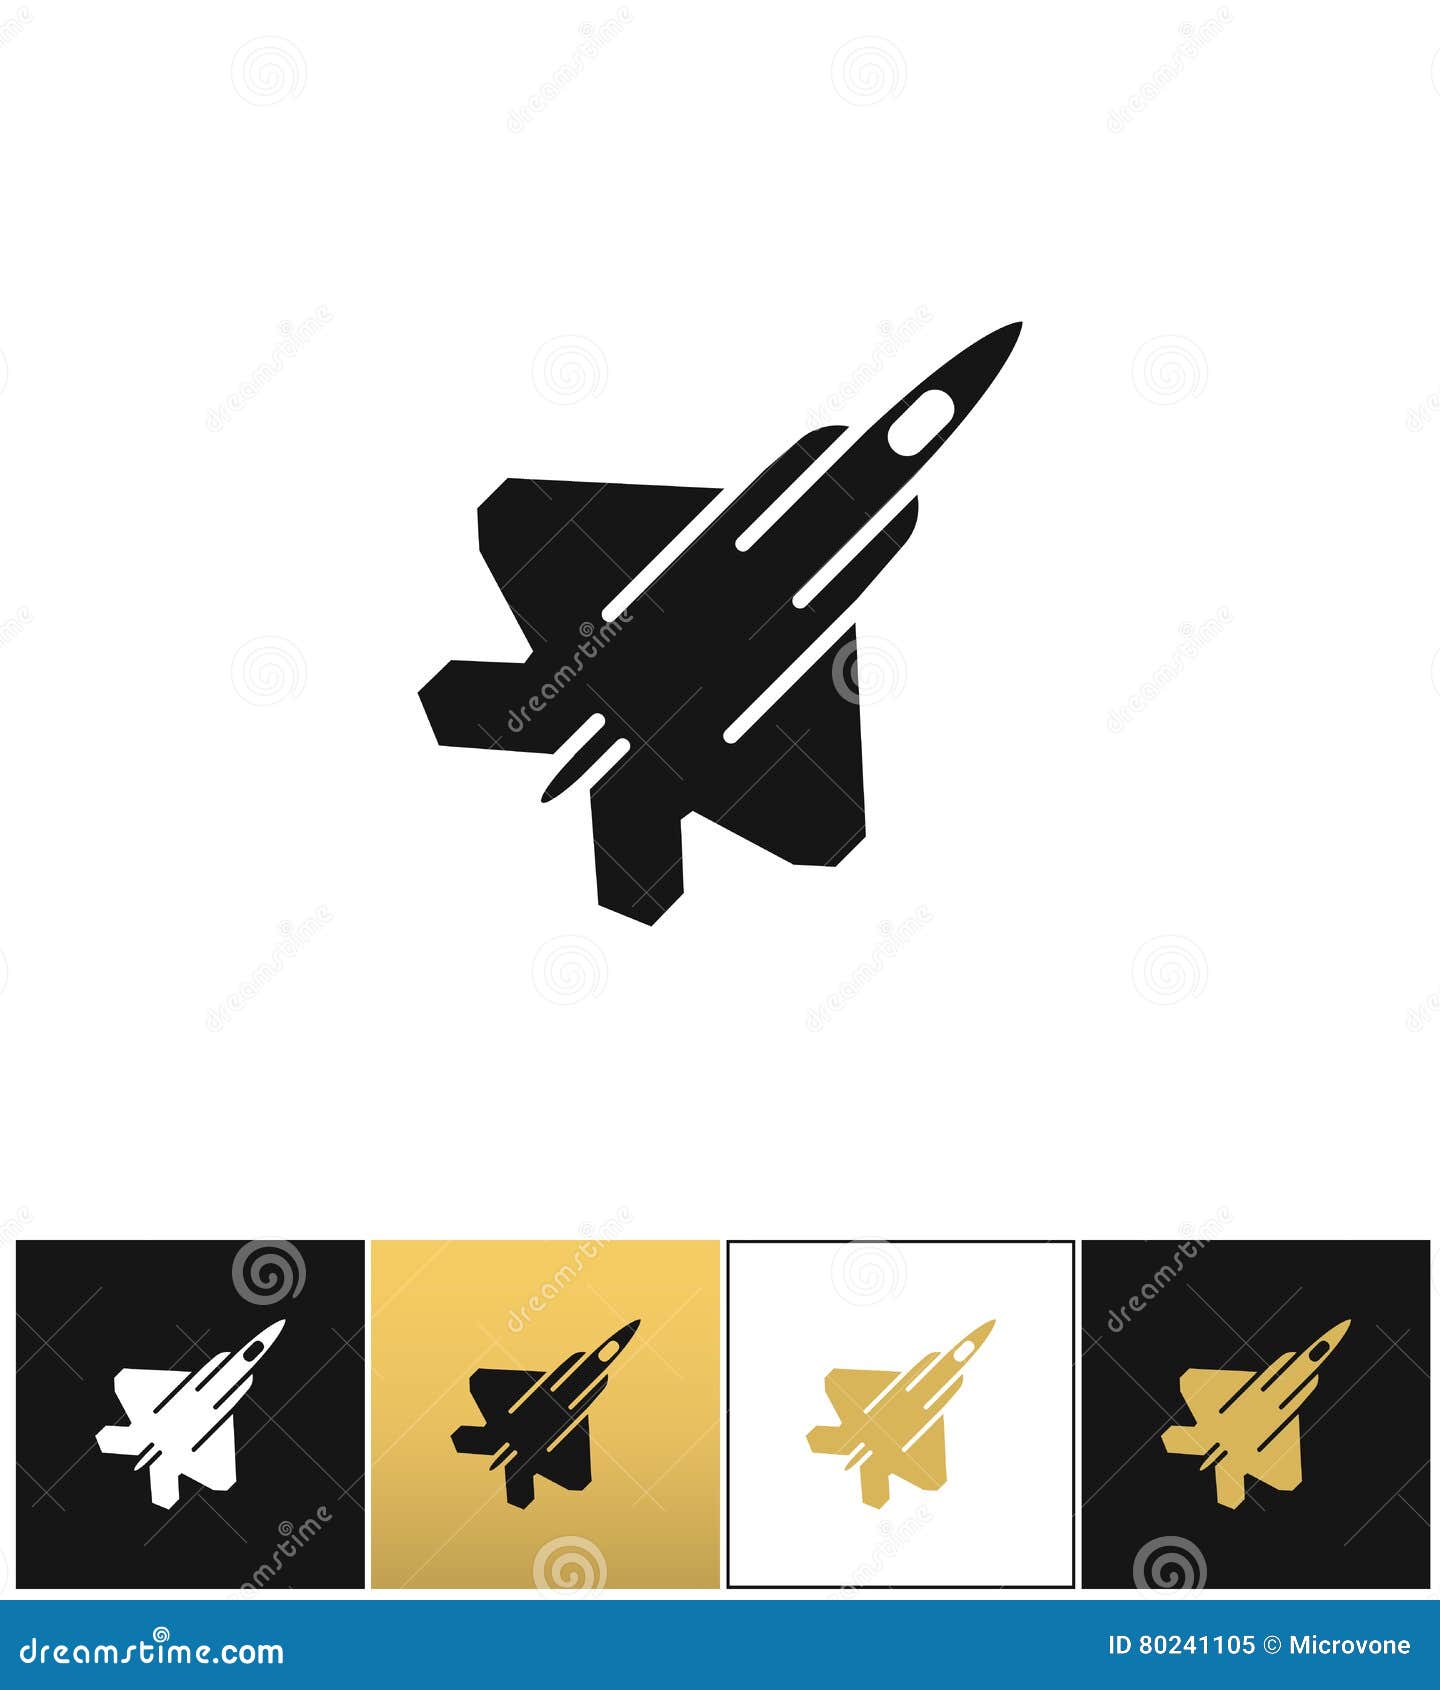 air force navy airforce  military plane or fighter jet icon